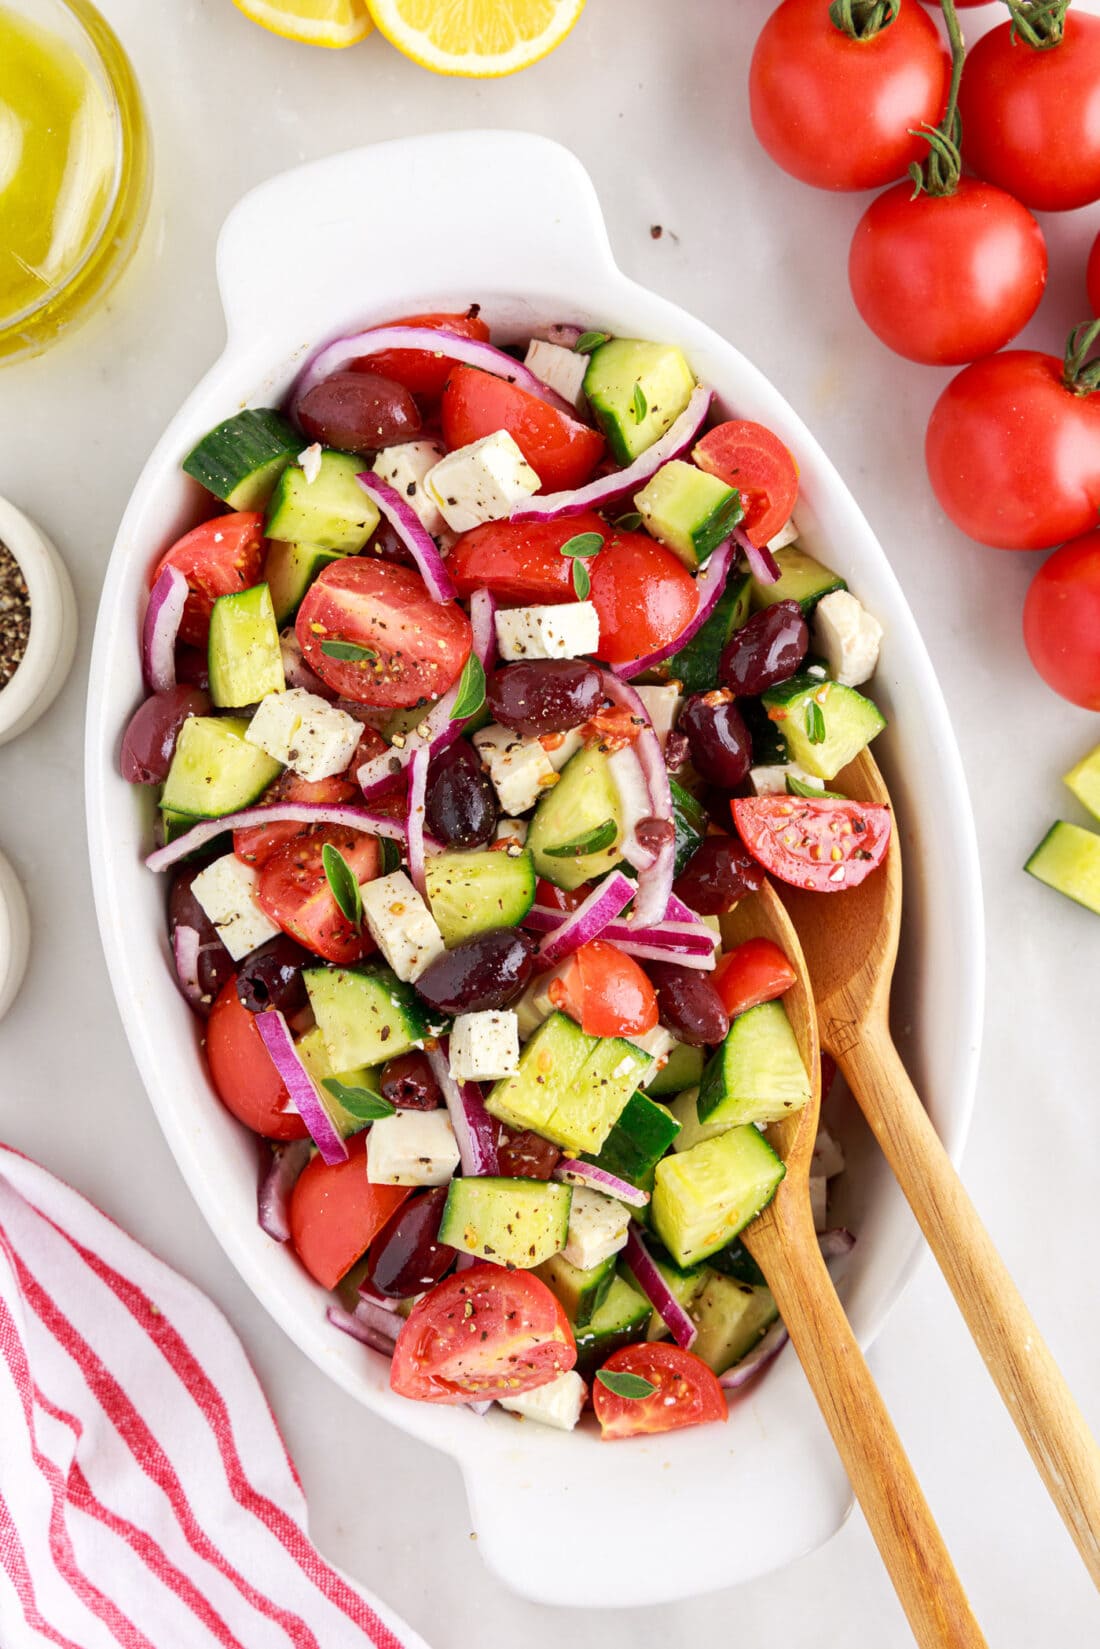 Greek Salad with wooden spoons